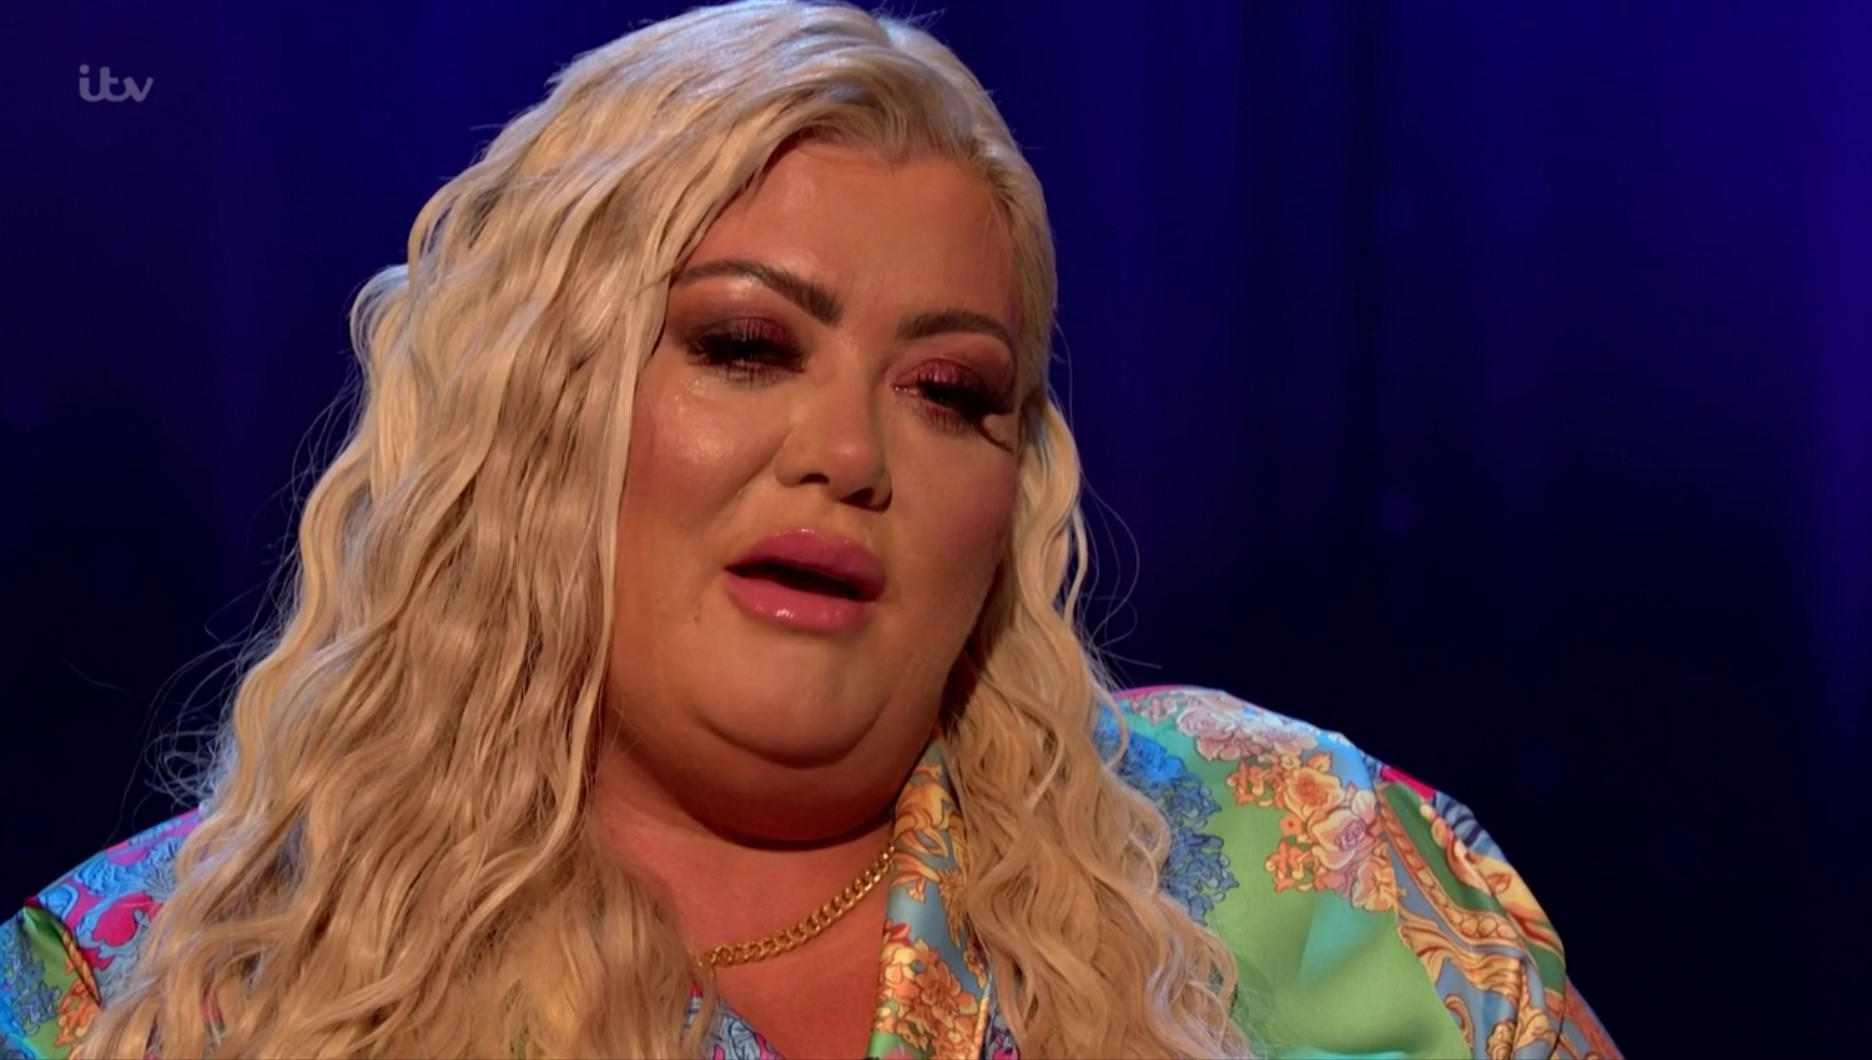 Gemma Collins breaks down in tears as she admits she contemplated suicide after James Argent split